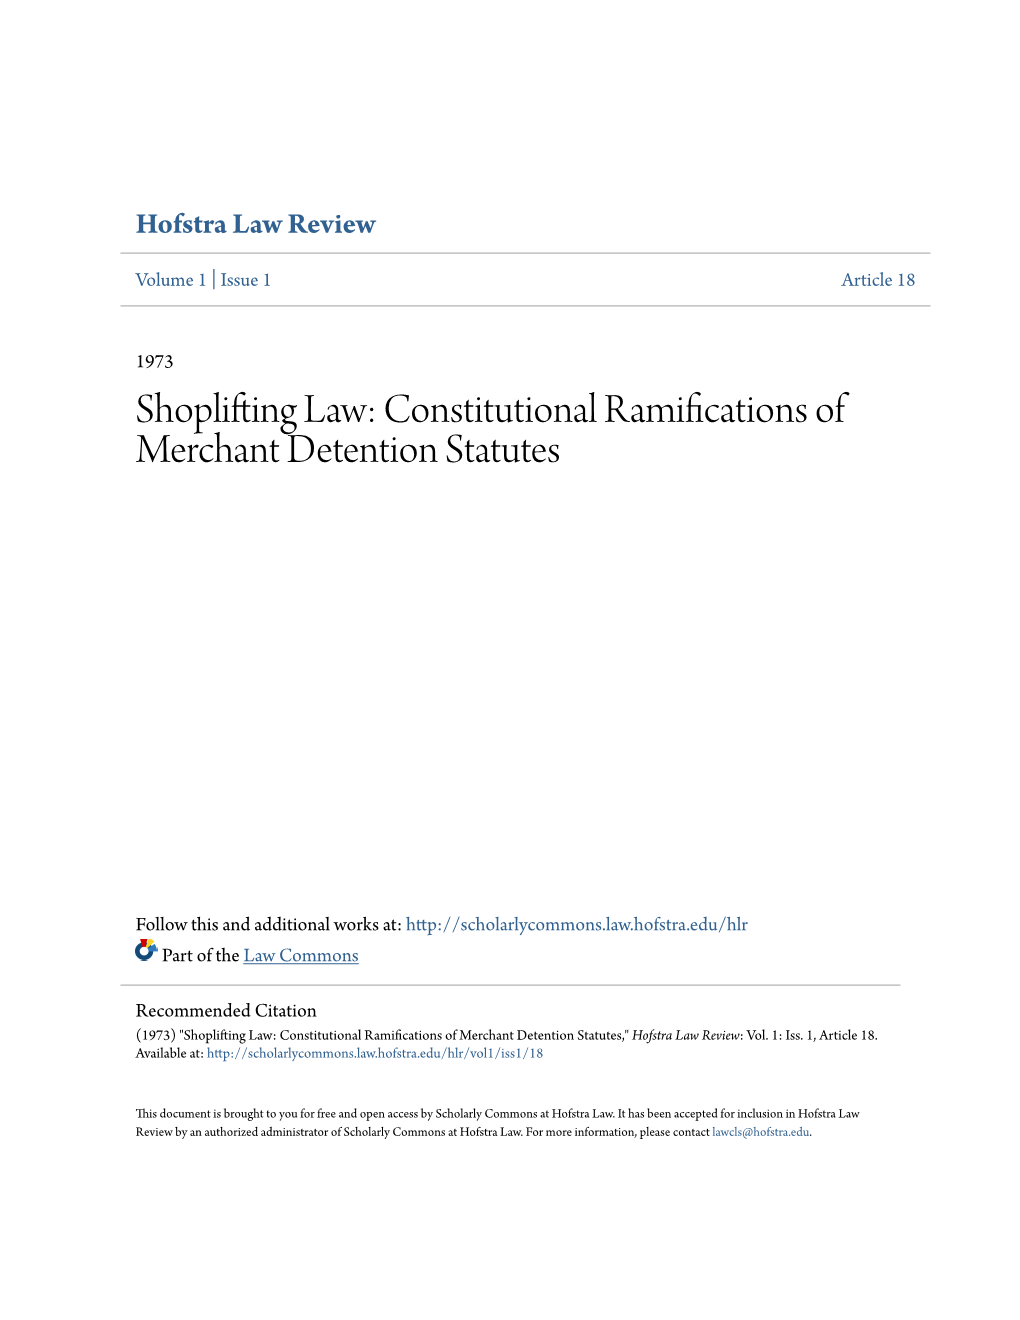 Constitutional Ramifications of Merchant Detention Statutes